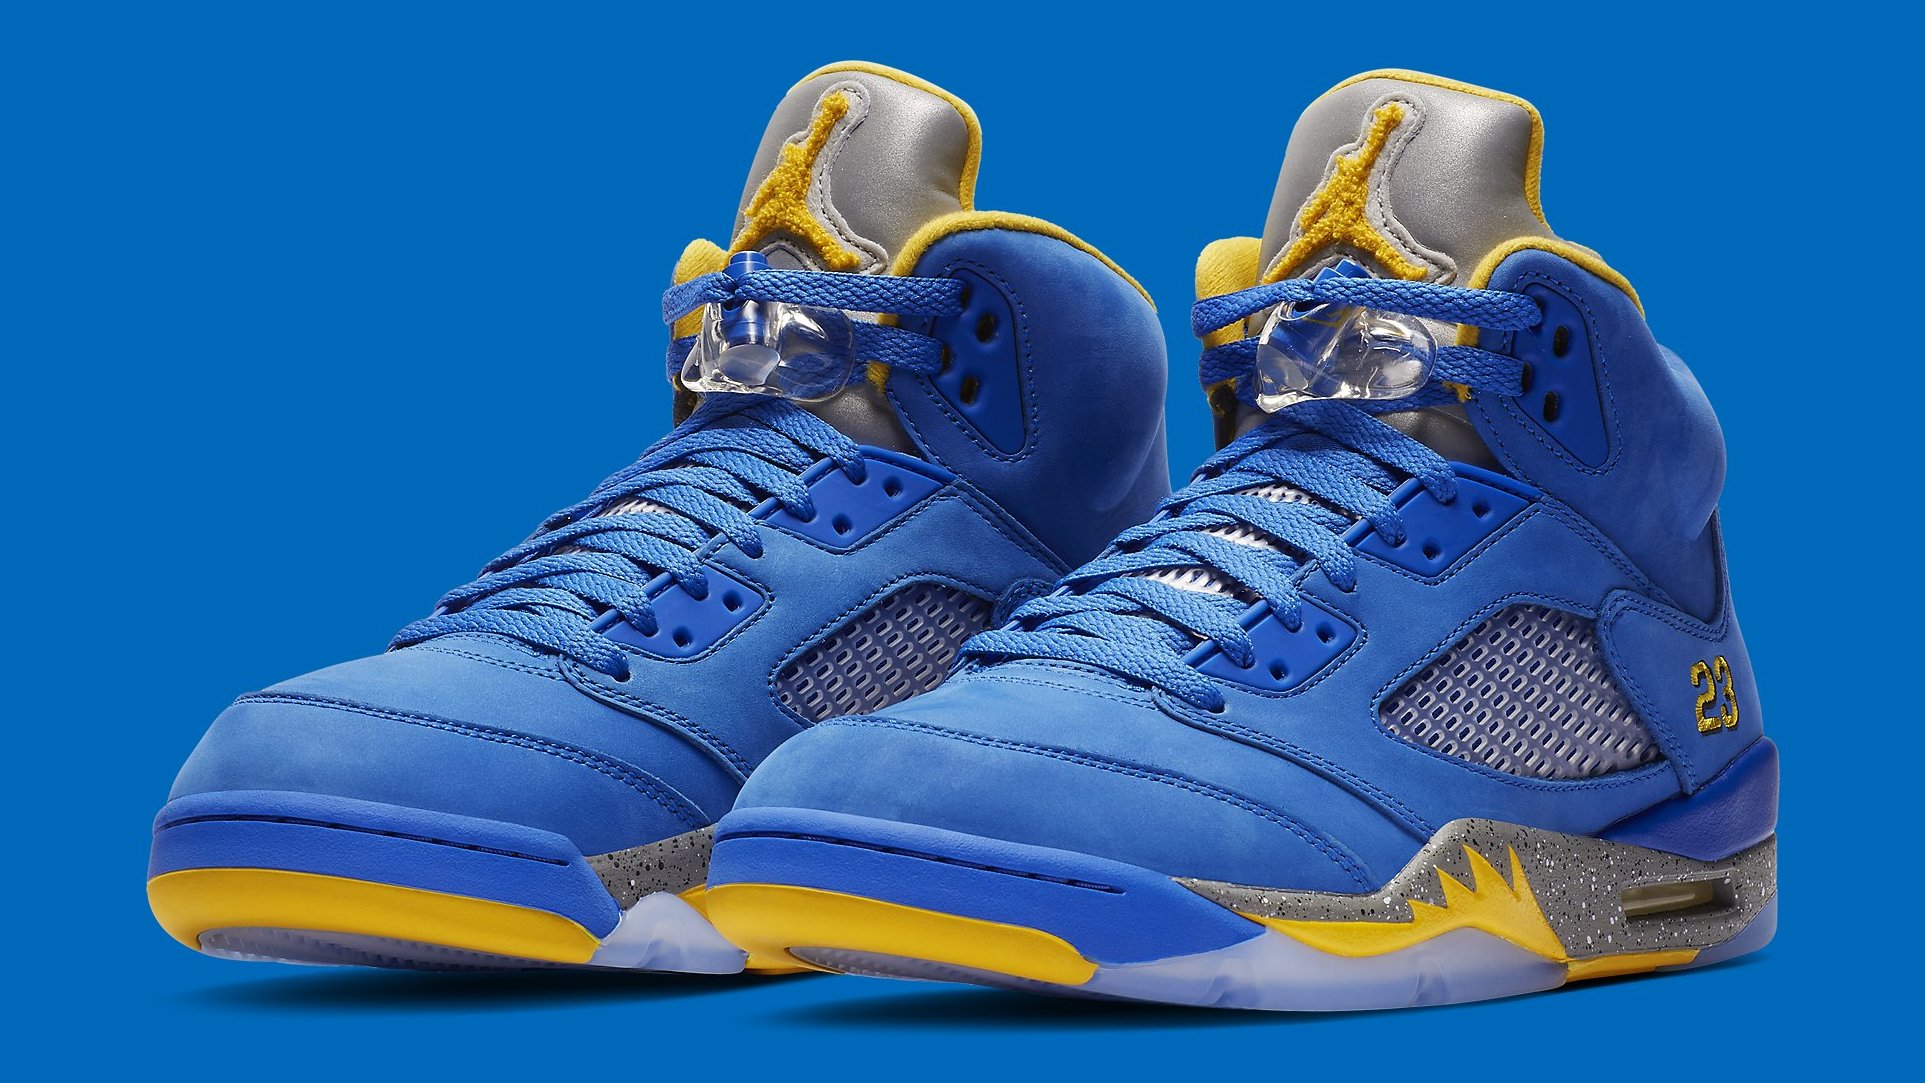 Release Date for the 2019 'Laney' Air Jordan 5s Has Been Pushed ...